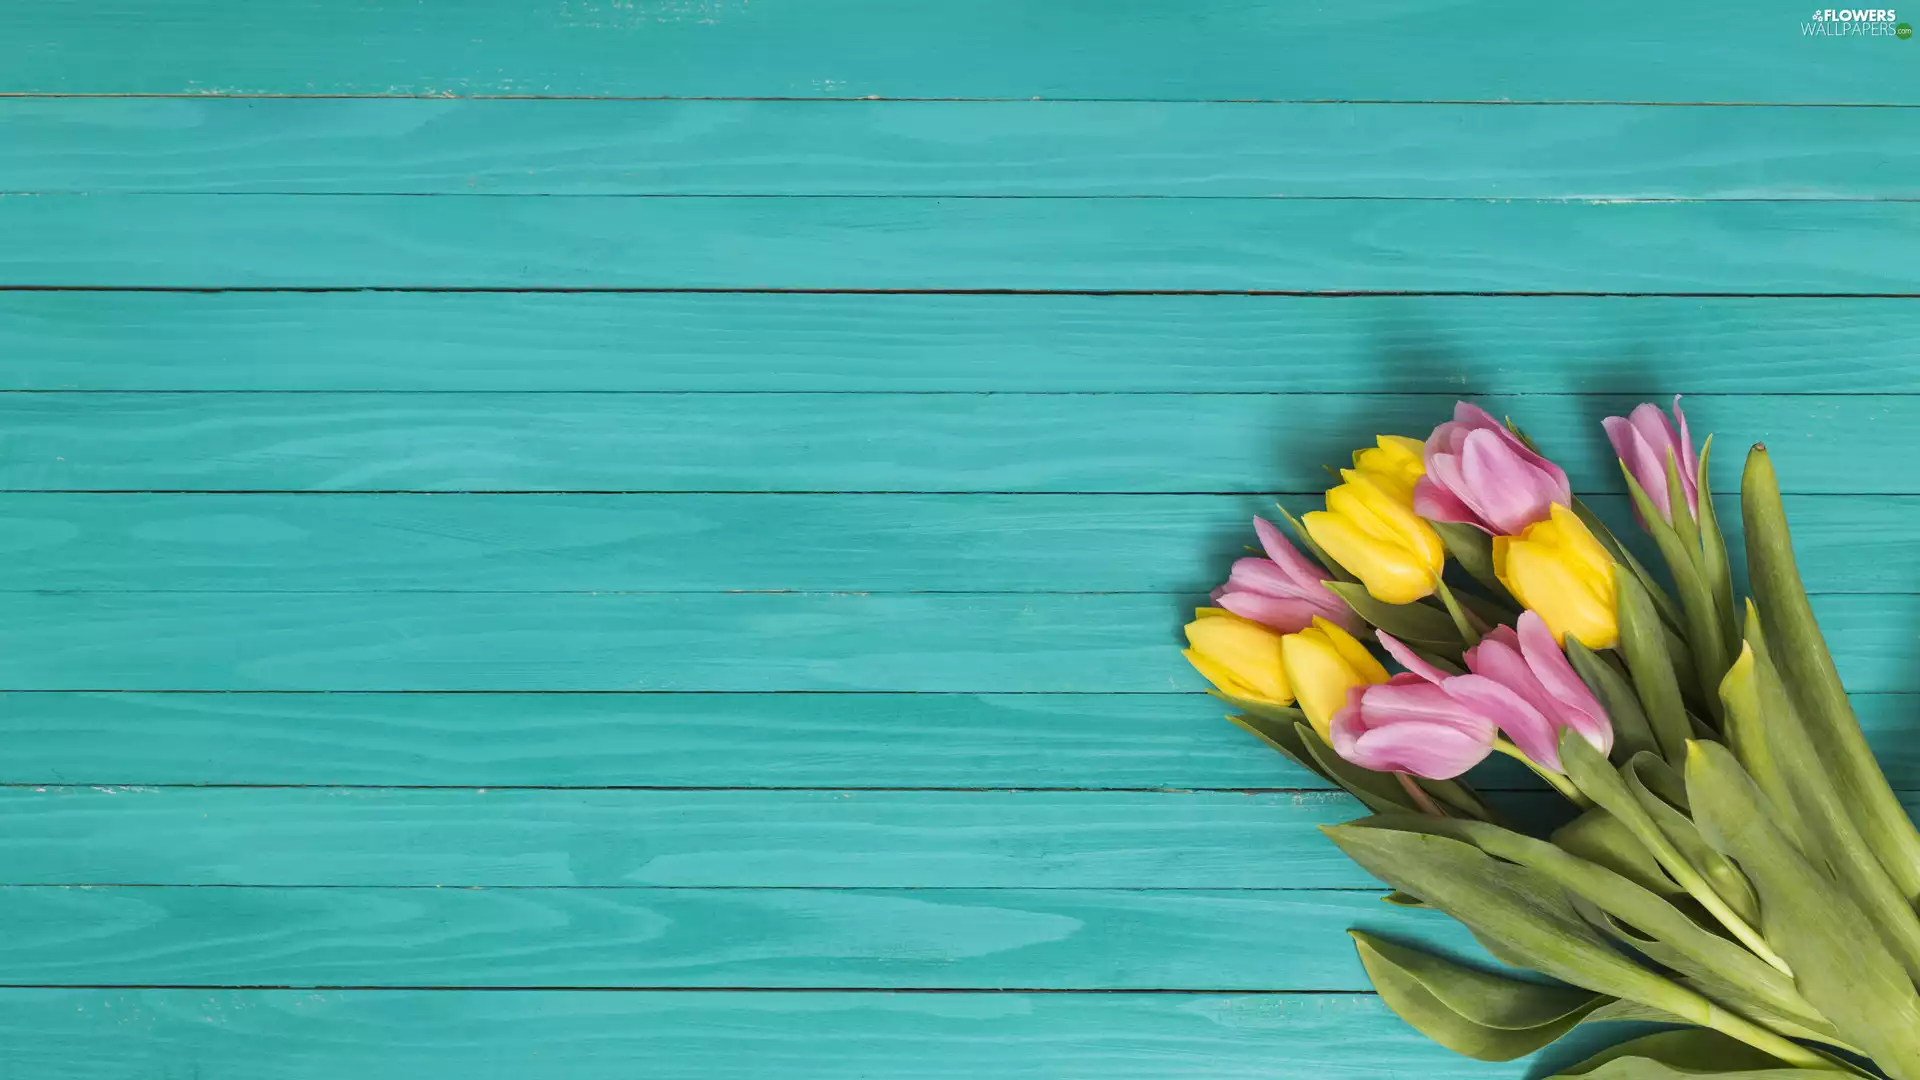 Tulips, Yellow, green ones, boarding, bouquet, Pink